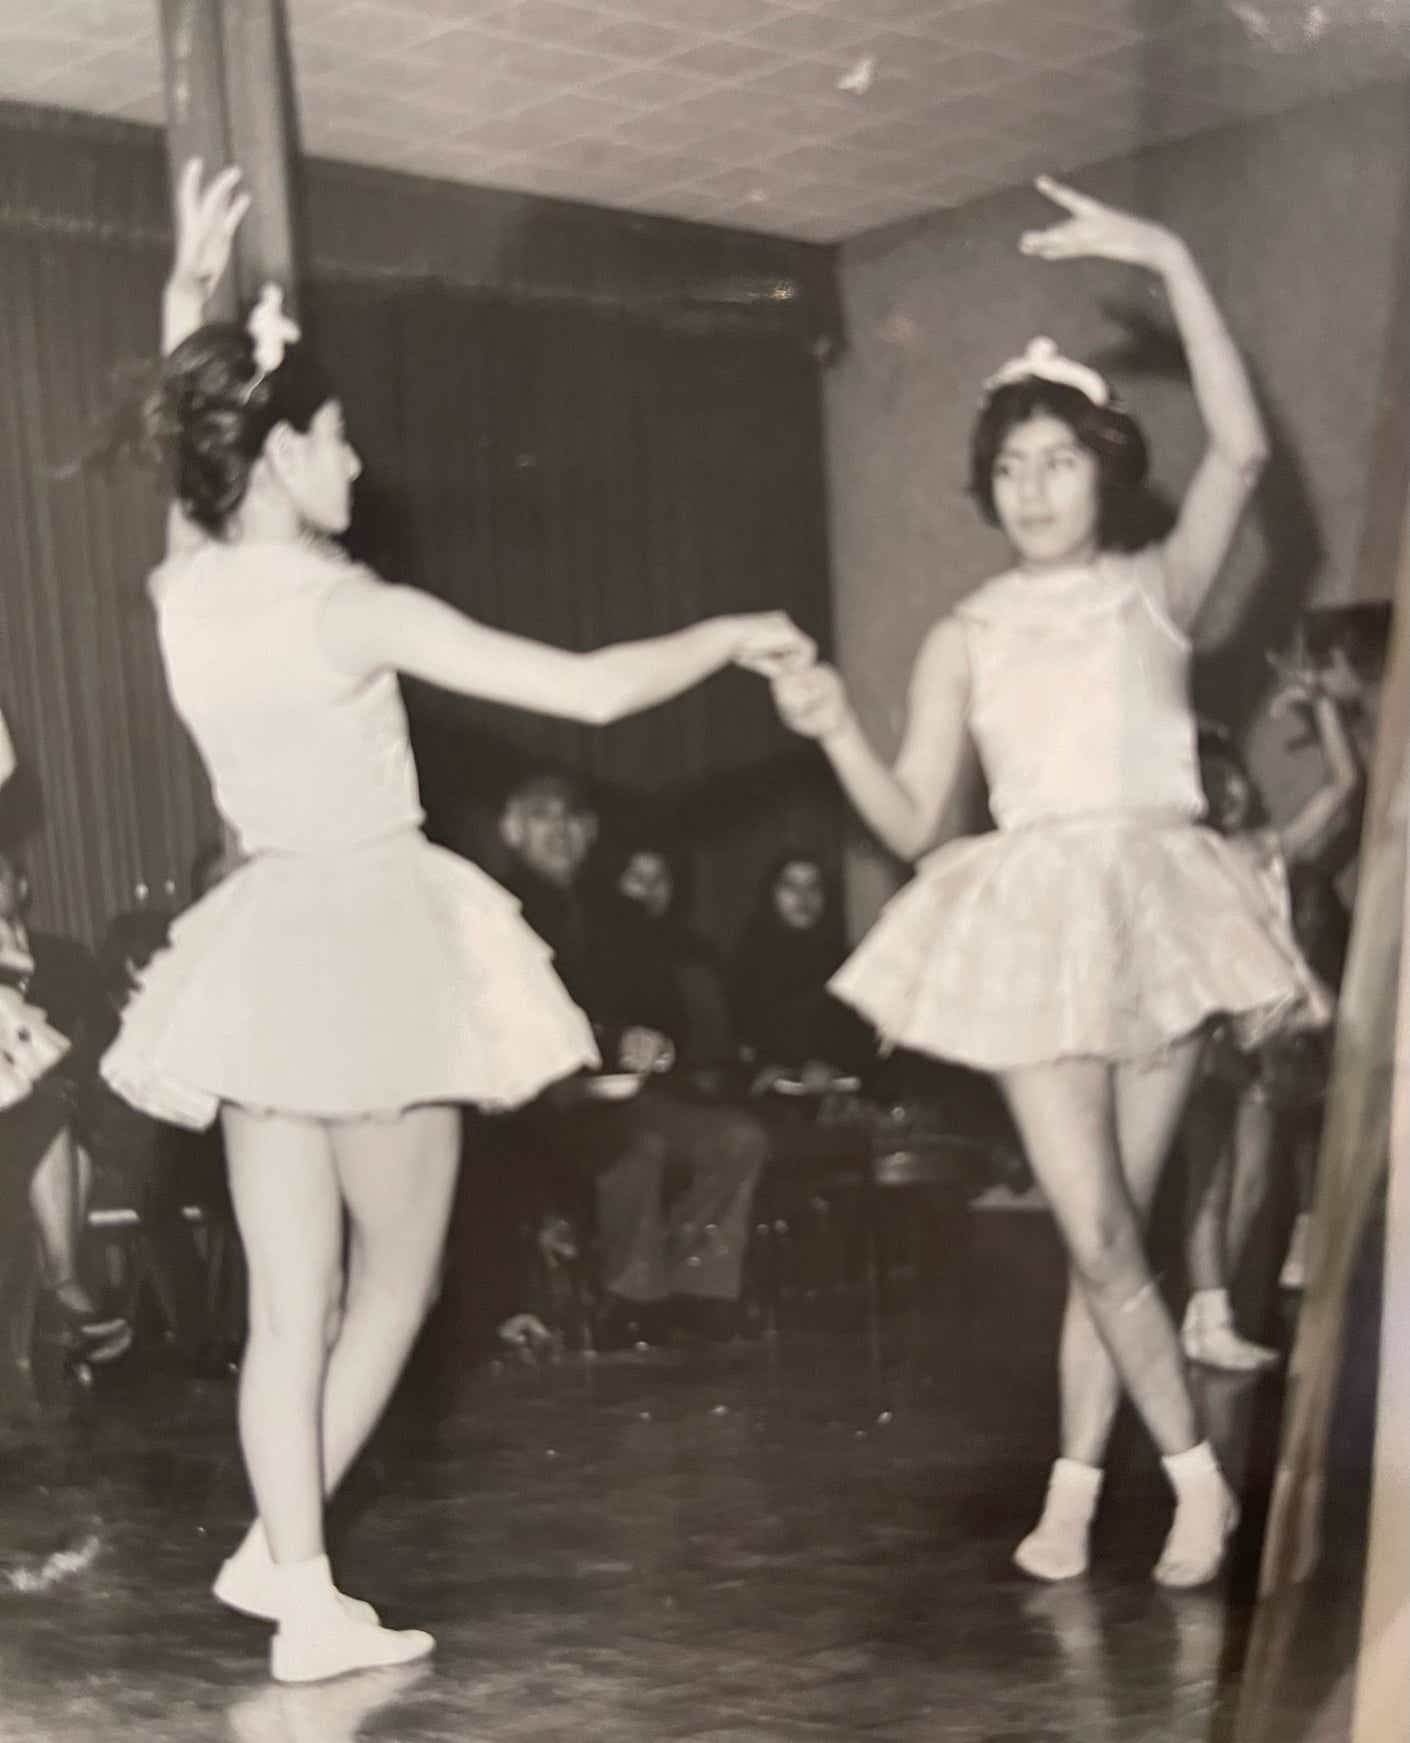 two young girls doing ballet in iran in the 1970s